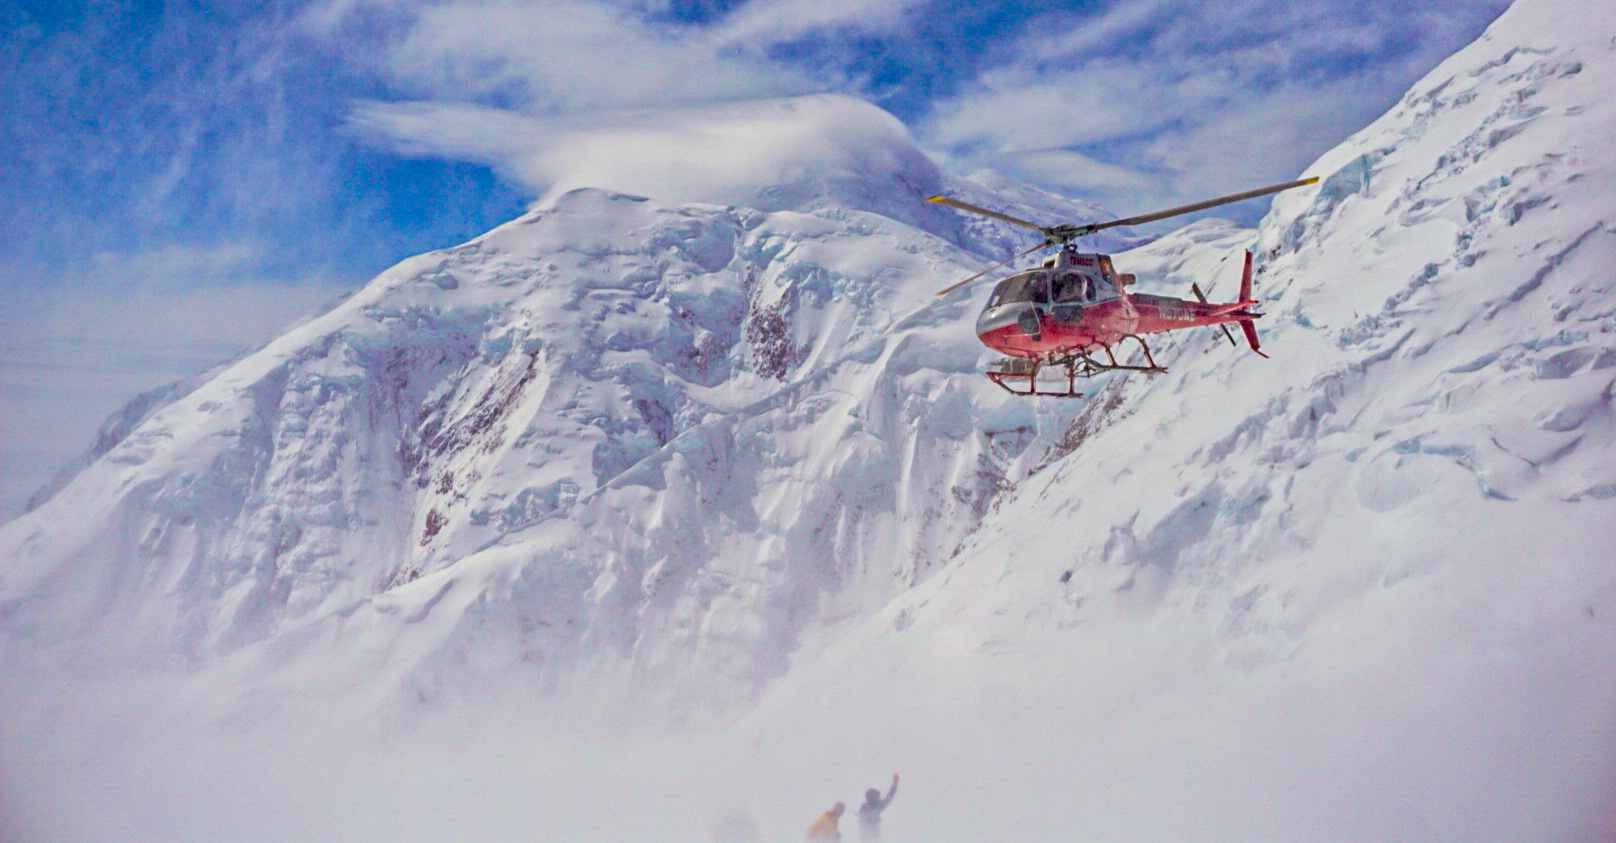 A red helicopter hovers above two climbers on the glacier below